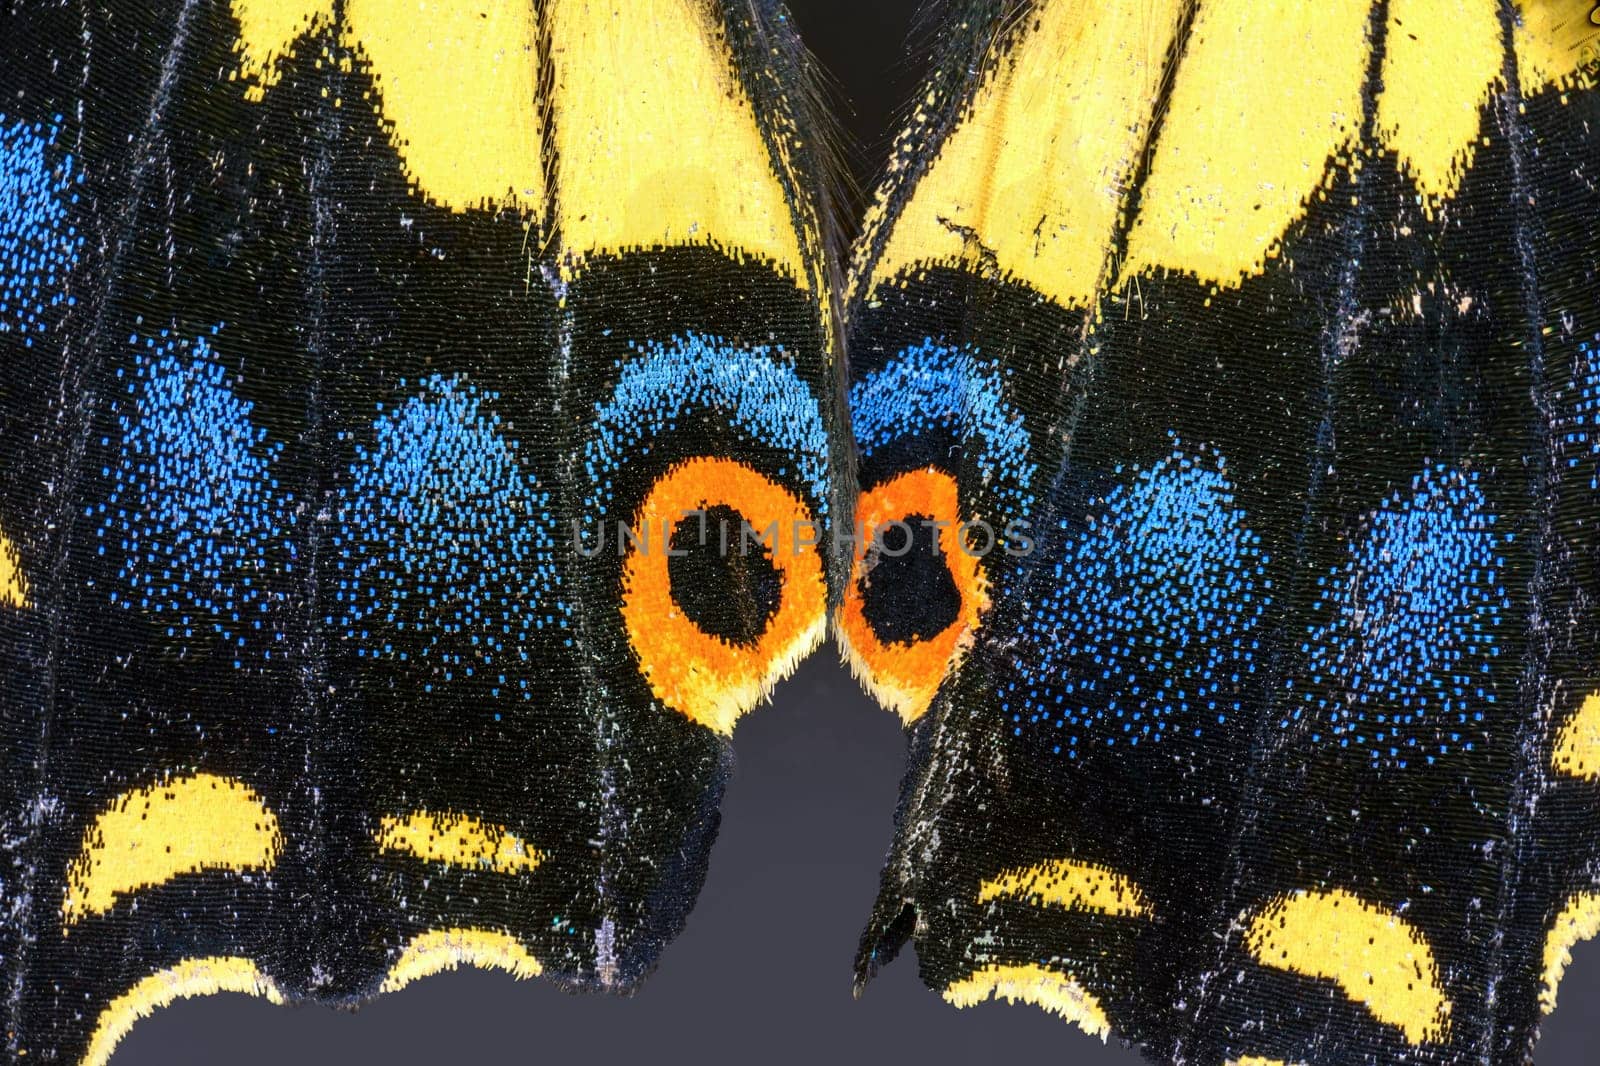 Anise Swallowtail Butterfly, Papilio zelicaon, Extreme Closeup of Wing Scales by RobertPB